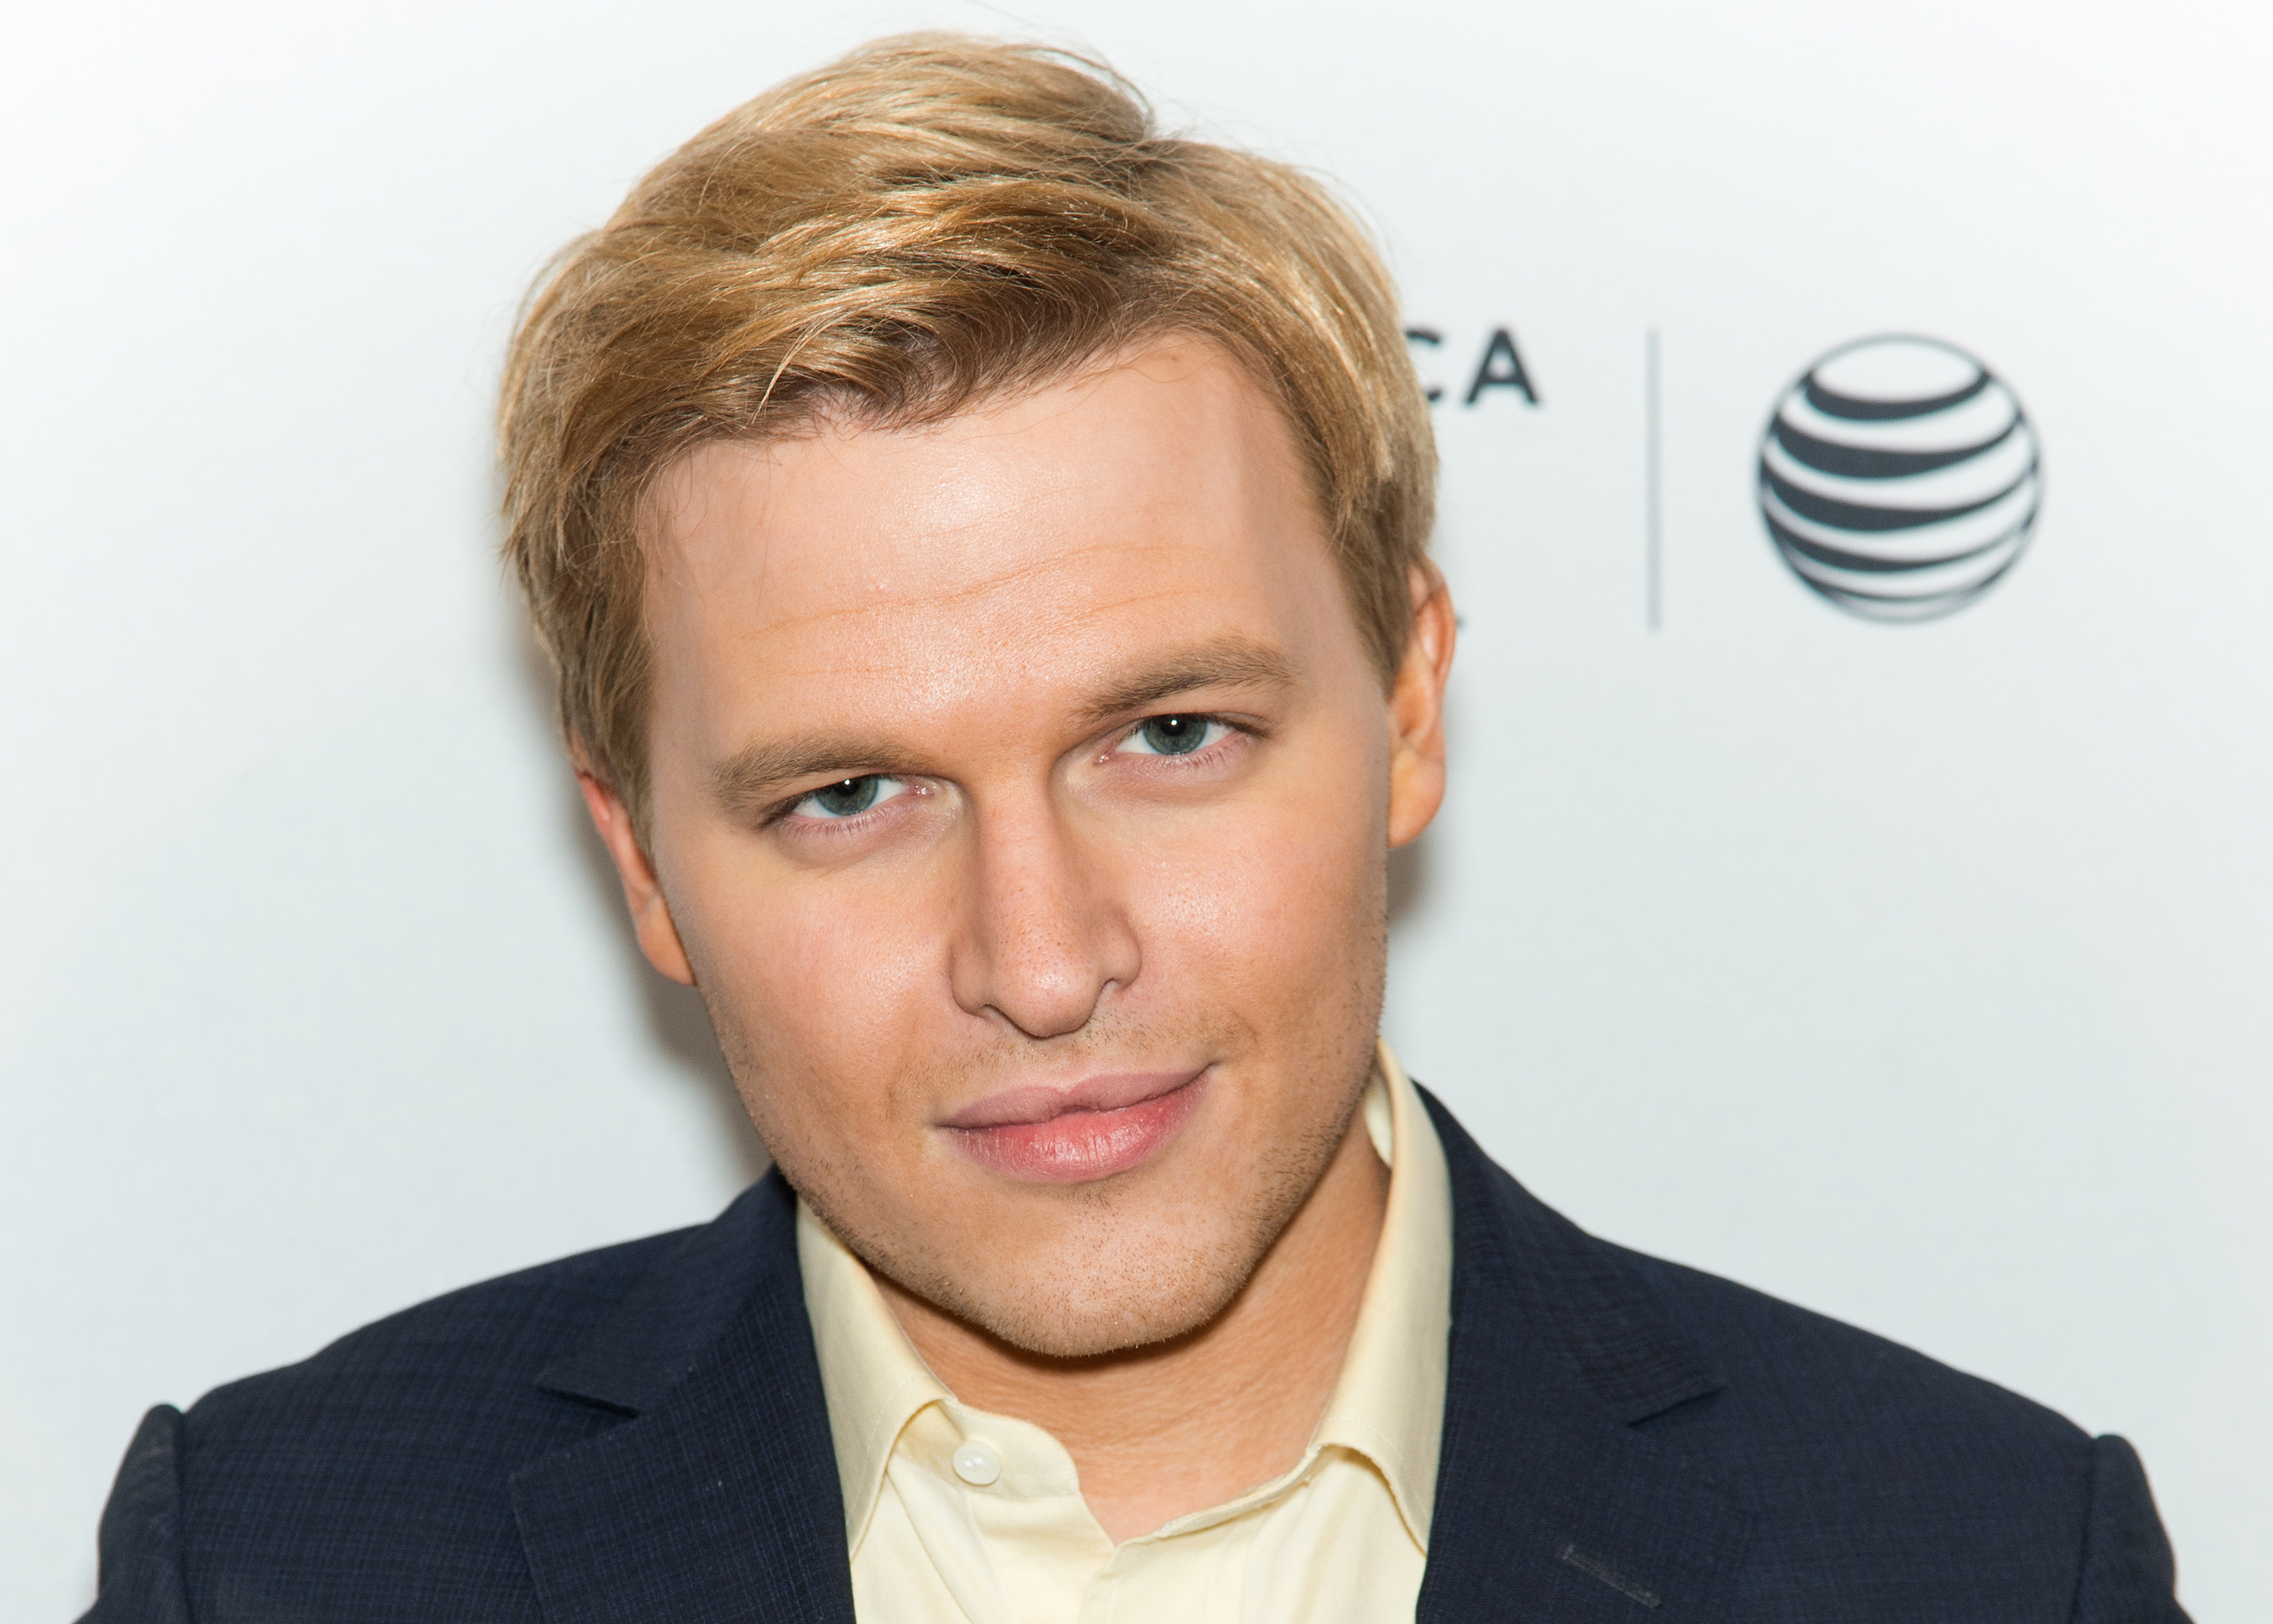 Activist Ronan Farrow attends the 2015 Tribeca Film Festival World Premiere Documentary: 'The Diplomat'  at SVA Theater 1 on April 23, 2015 in New York City. (Gilbert Carrasquillo&mdash;FilmMagic/Getty Images)